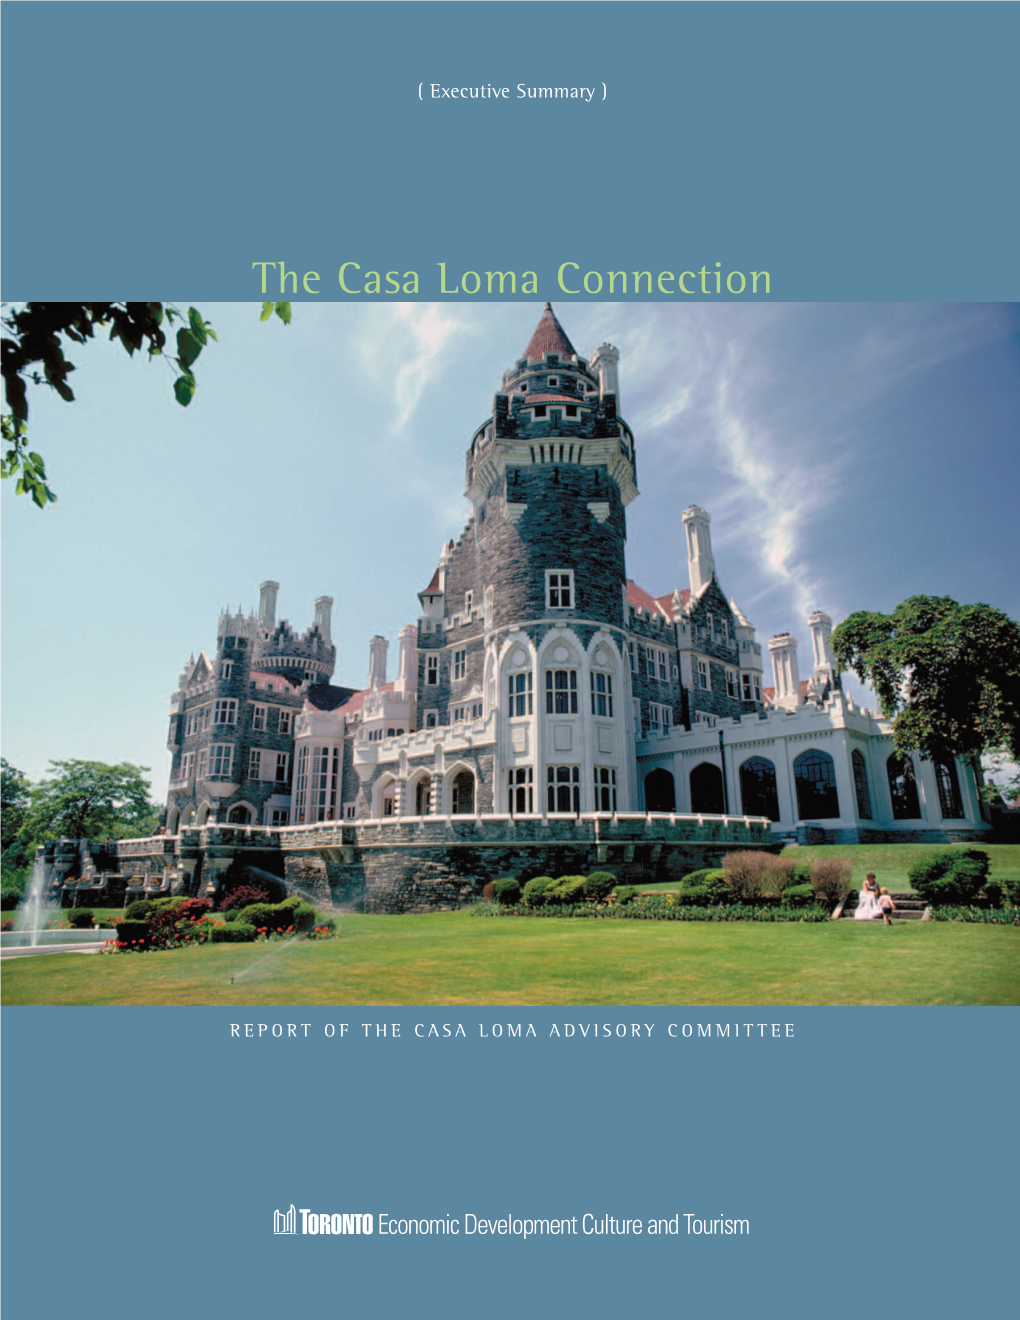 The Casa Loma Connection